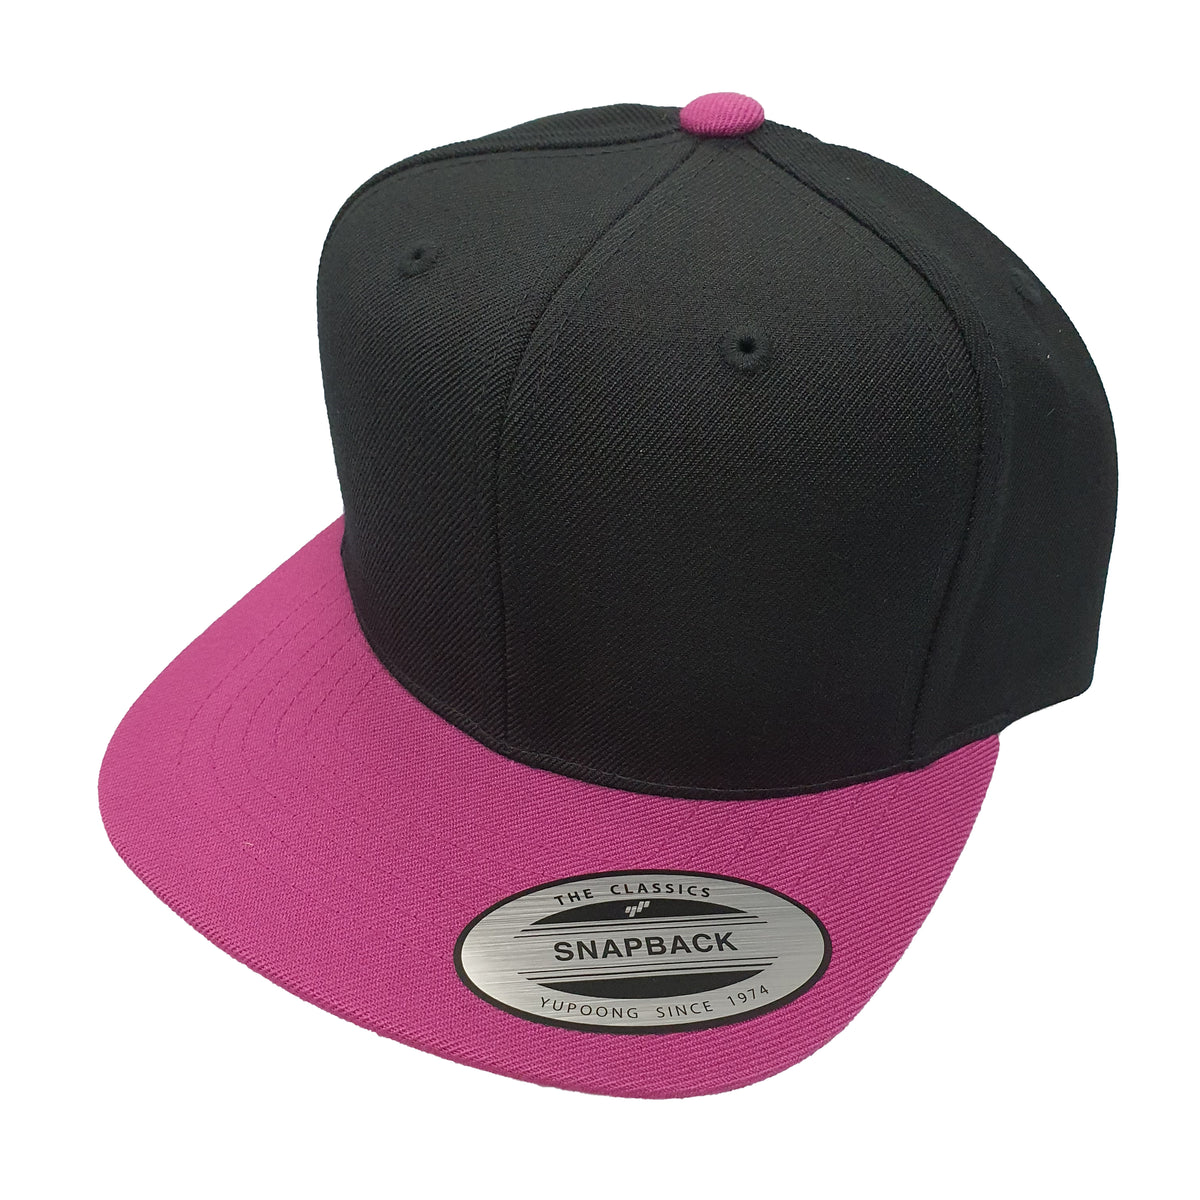 Get the latest information on our FLEXFIT (Youth) - Classic Snapback - Black /Hot Pink FLEXFIT